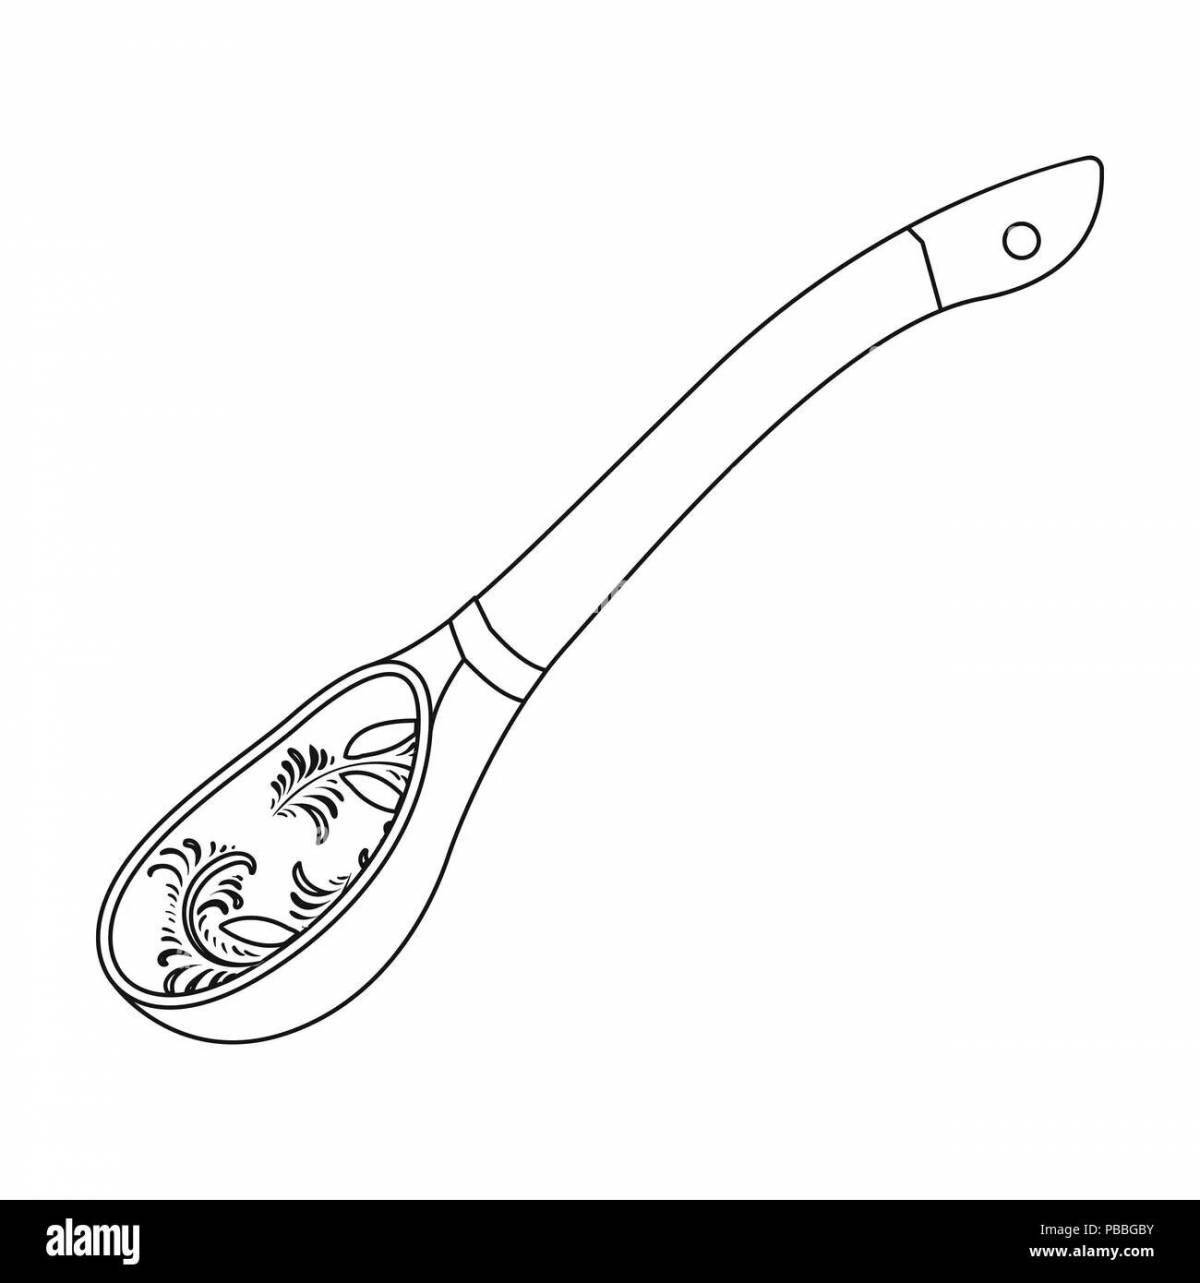 Funky wooden spoon coloring page